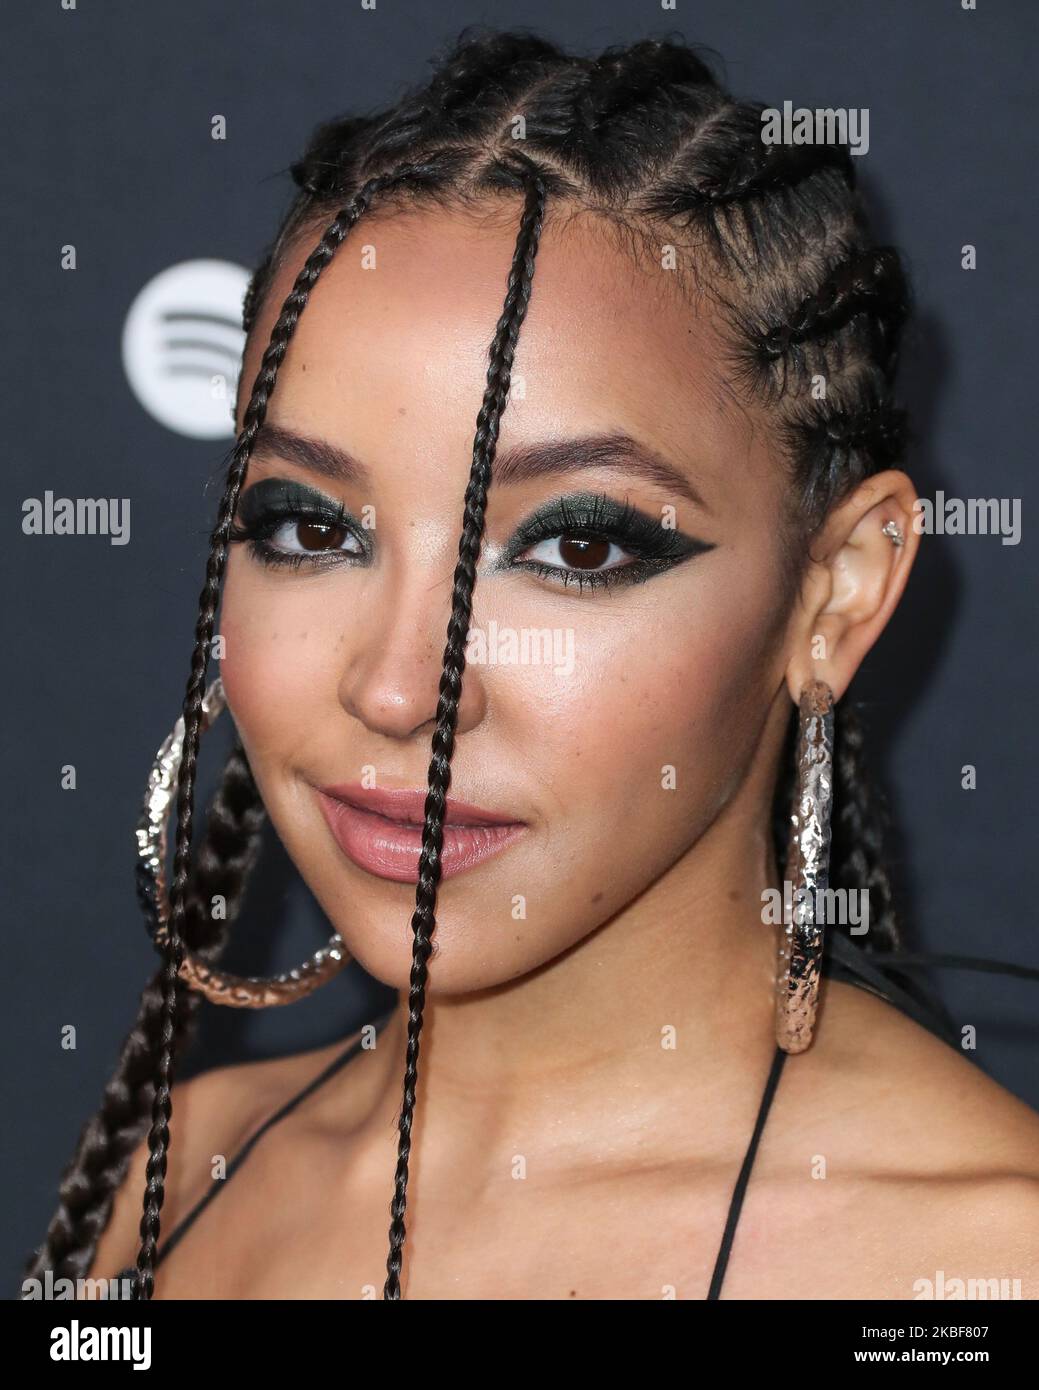 WEST HOLLYWOOD, LOS ANGELES, CALIFORNIA, USA - JANUARY 23: Singer Tinashe arrives at the Spotify Best New Artist 2020 Party held at The Lot Studios on January 23, 2020 in West Hollywood, Los Angeles, California, United States. (Photo by Xavier Collin/Image Press Agency/NurPhoto) Stock Photo